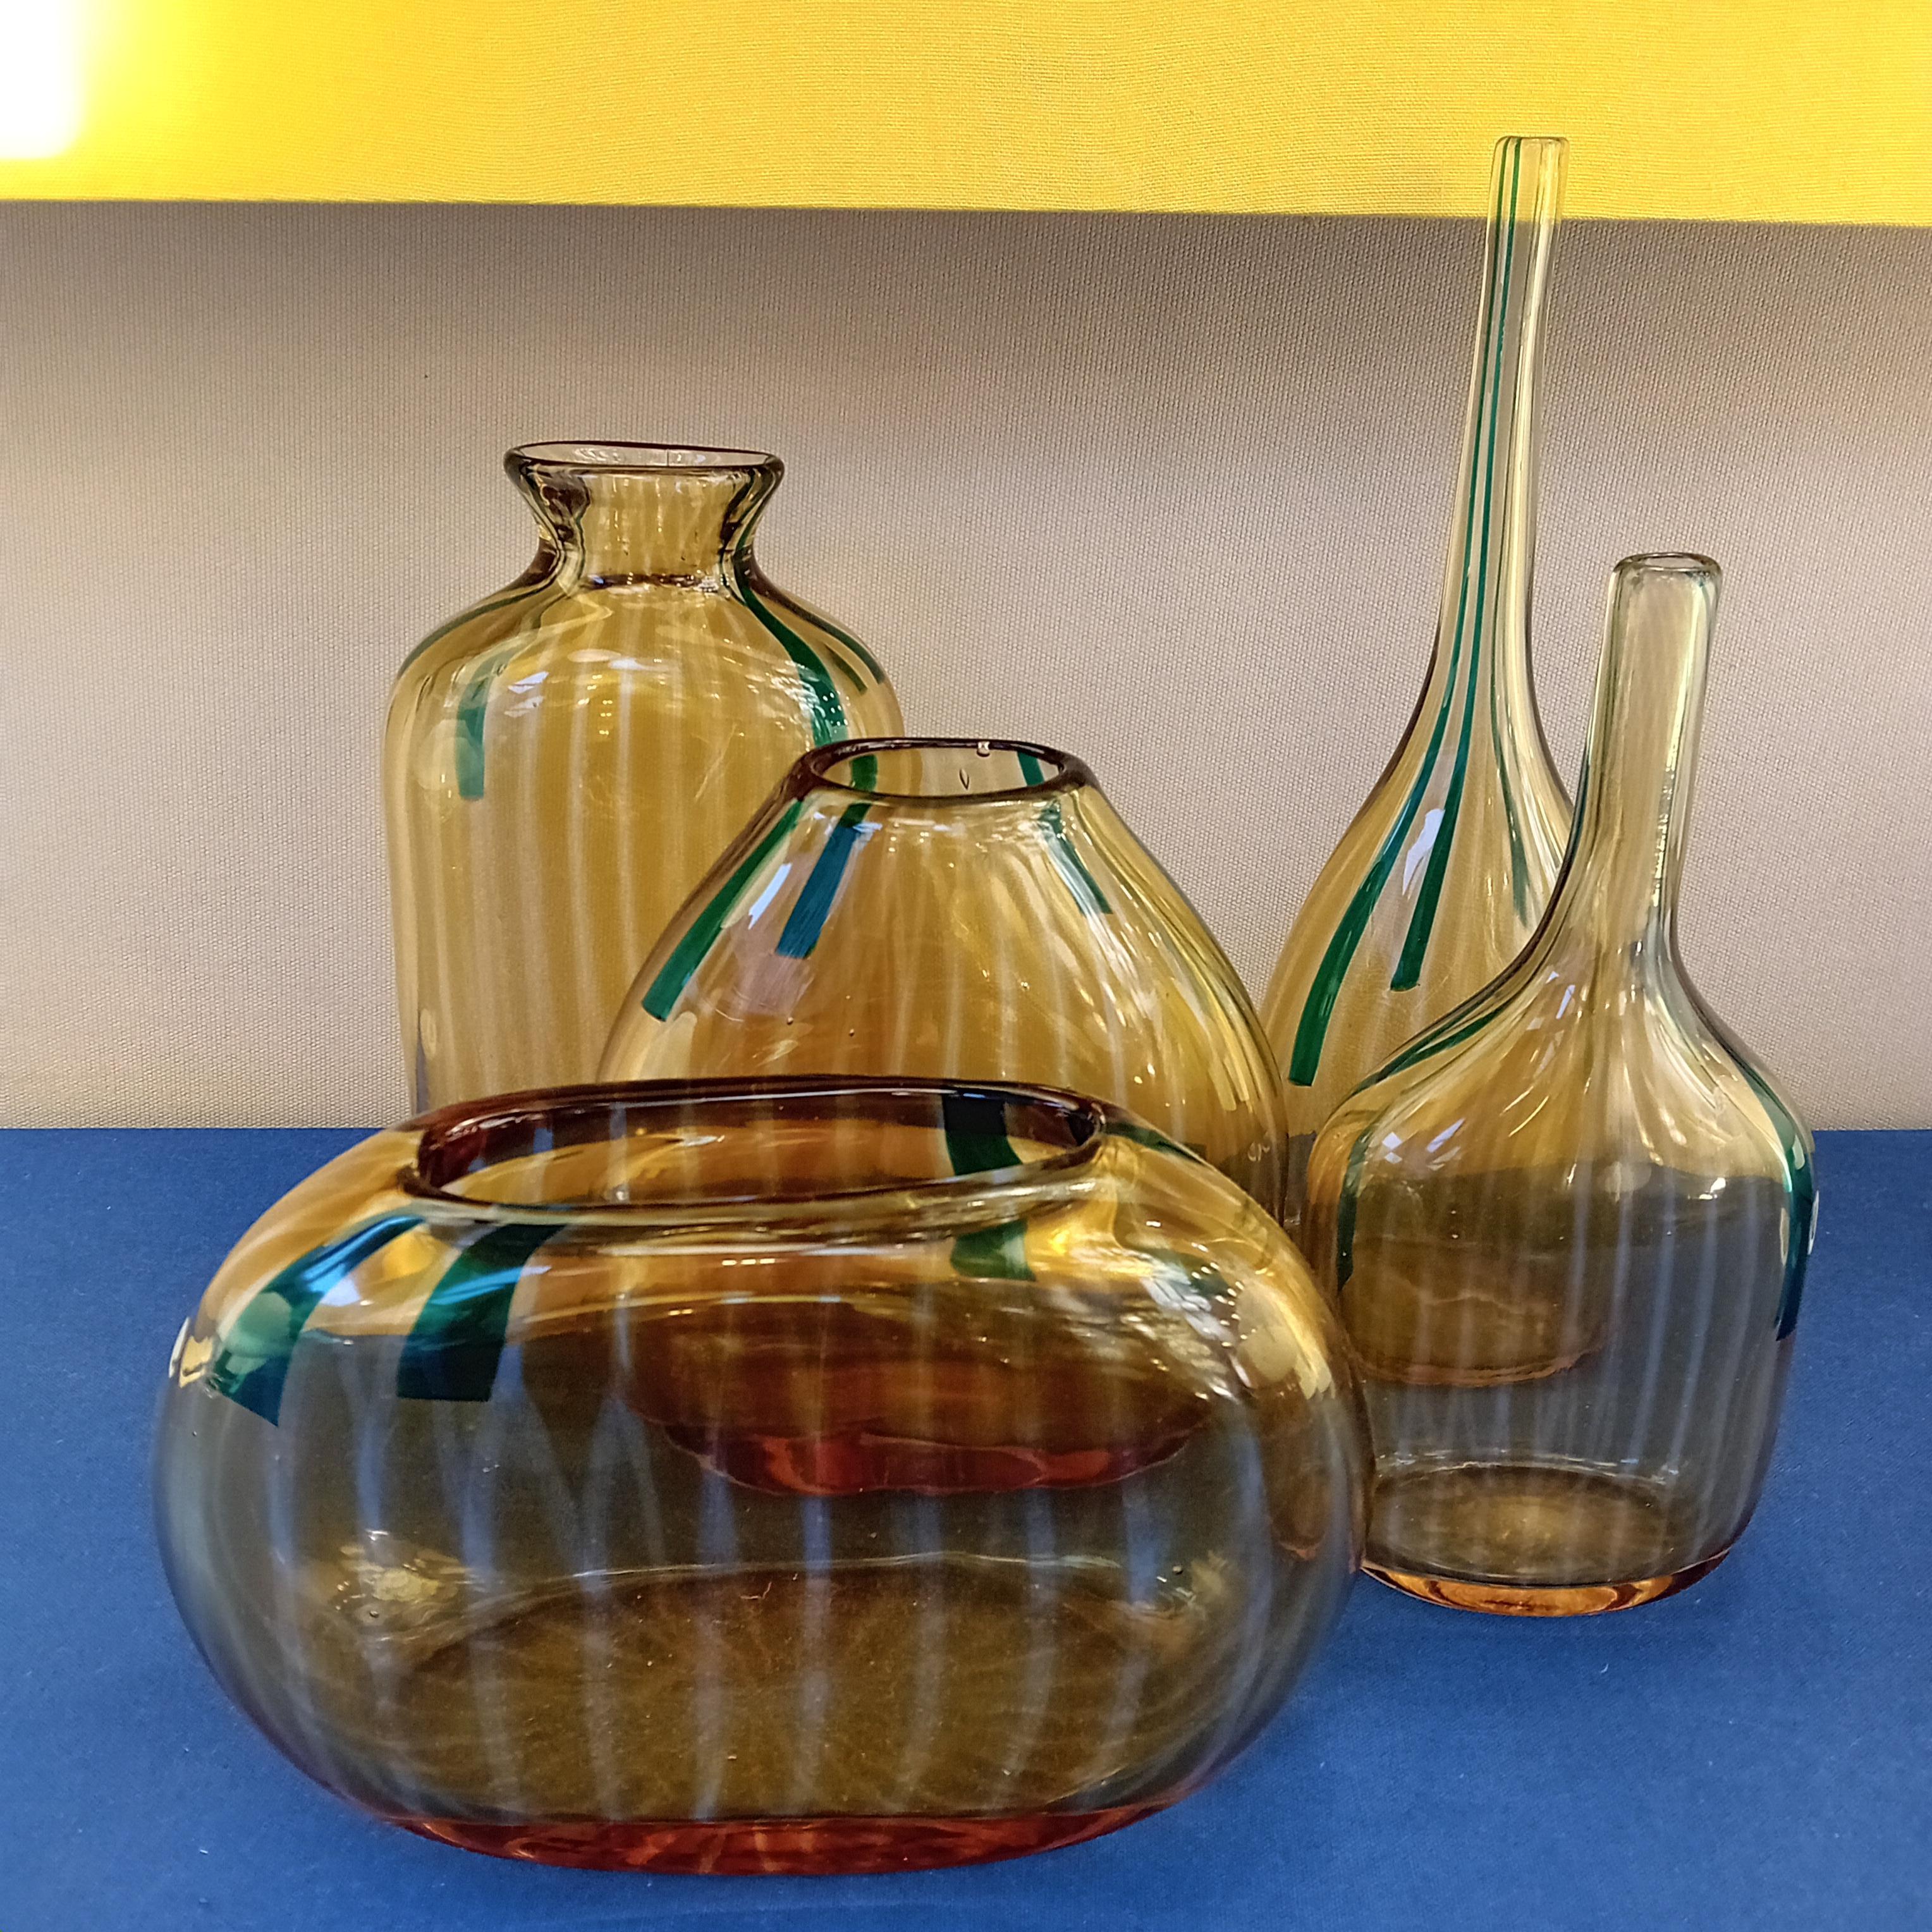 This set of five vases were designed by Sergio Asti in 1963 and presented at the XXXII Biennial of Venice. The serie is called Clio, consisted of indented vases made of fused glass canes.
Colour : orange, translucide and antic green

Biblio : Vetri